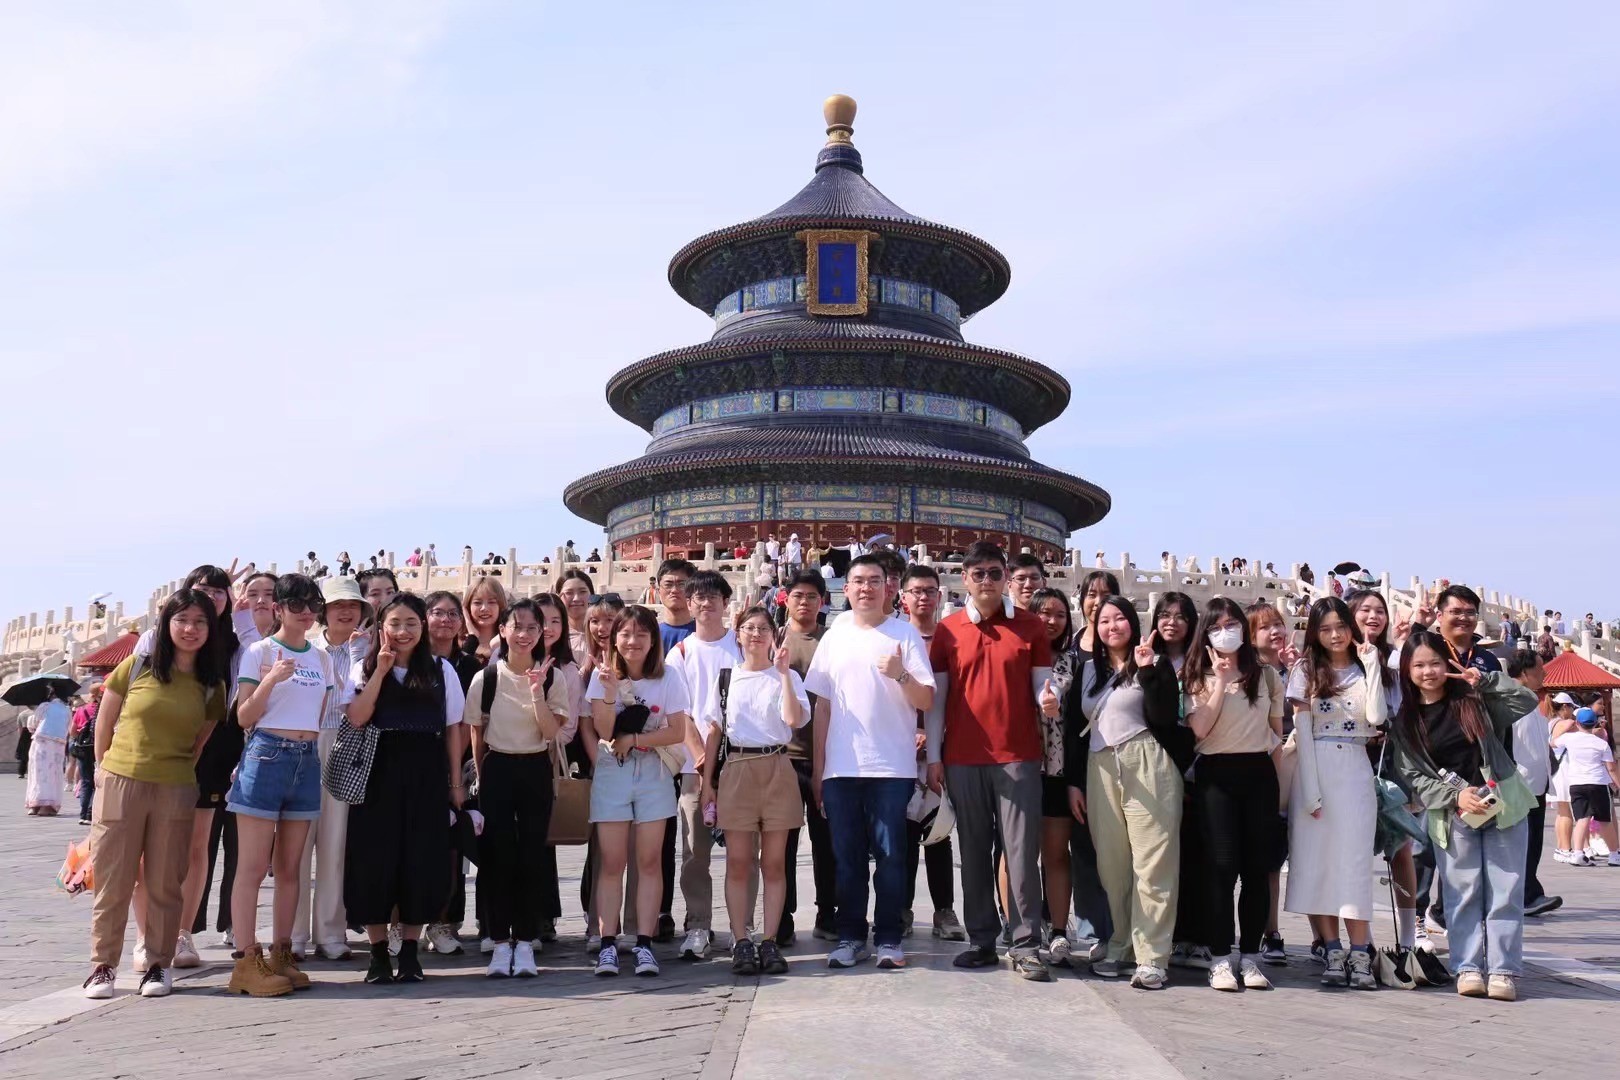 Group photo at the Temple of Heaven.